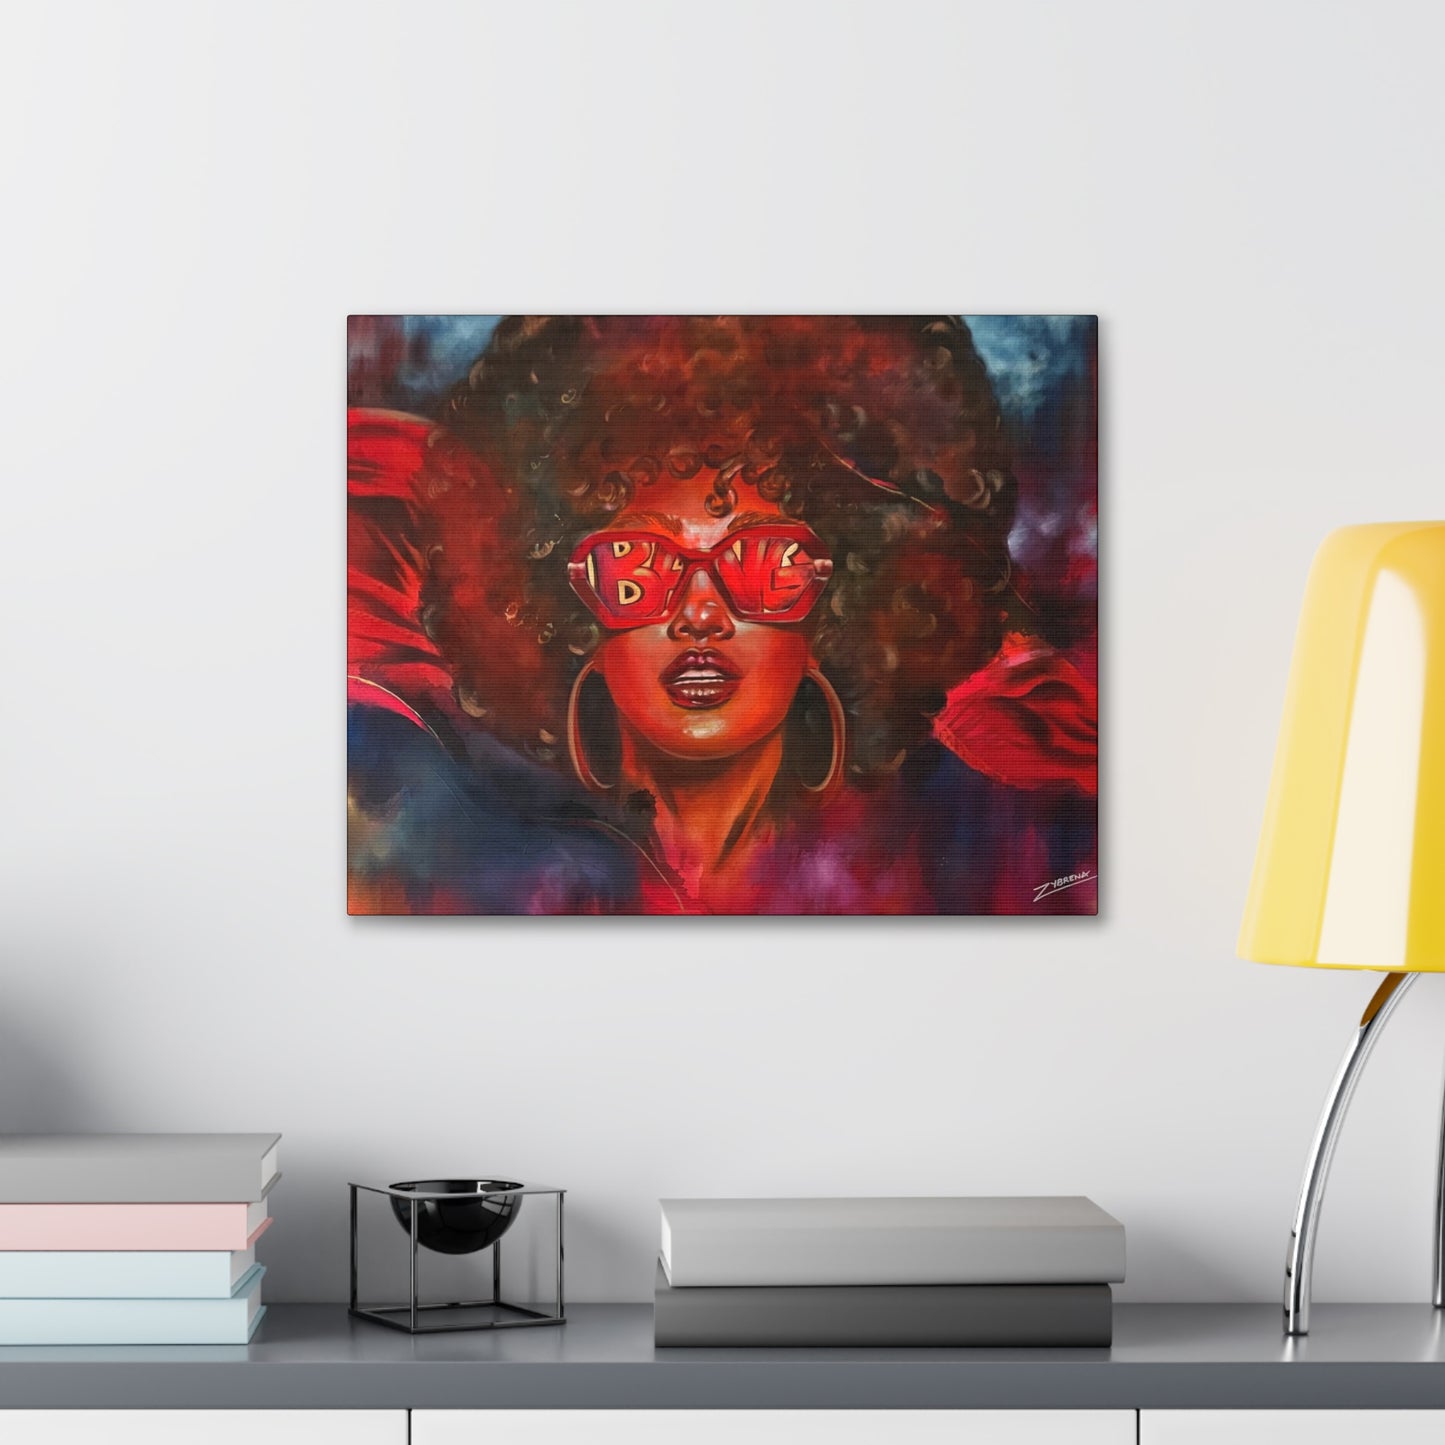 The Future is Bright: BANG! Canvas Gallery Wrapped Print